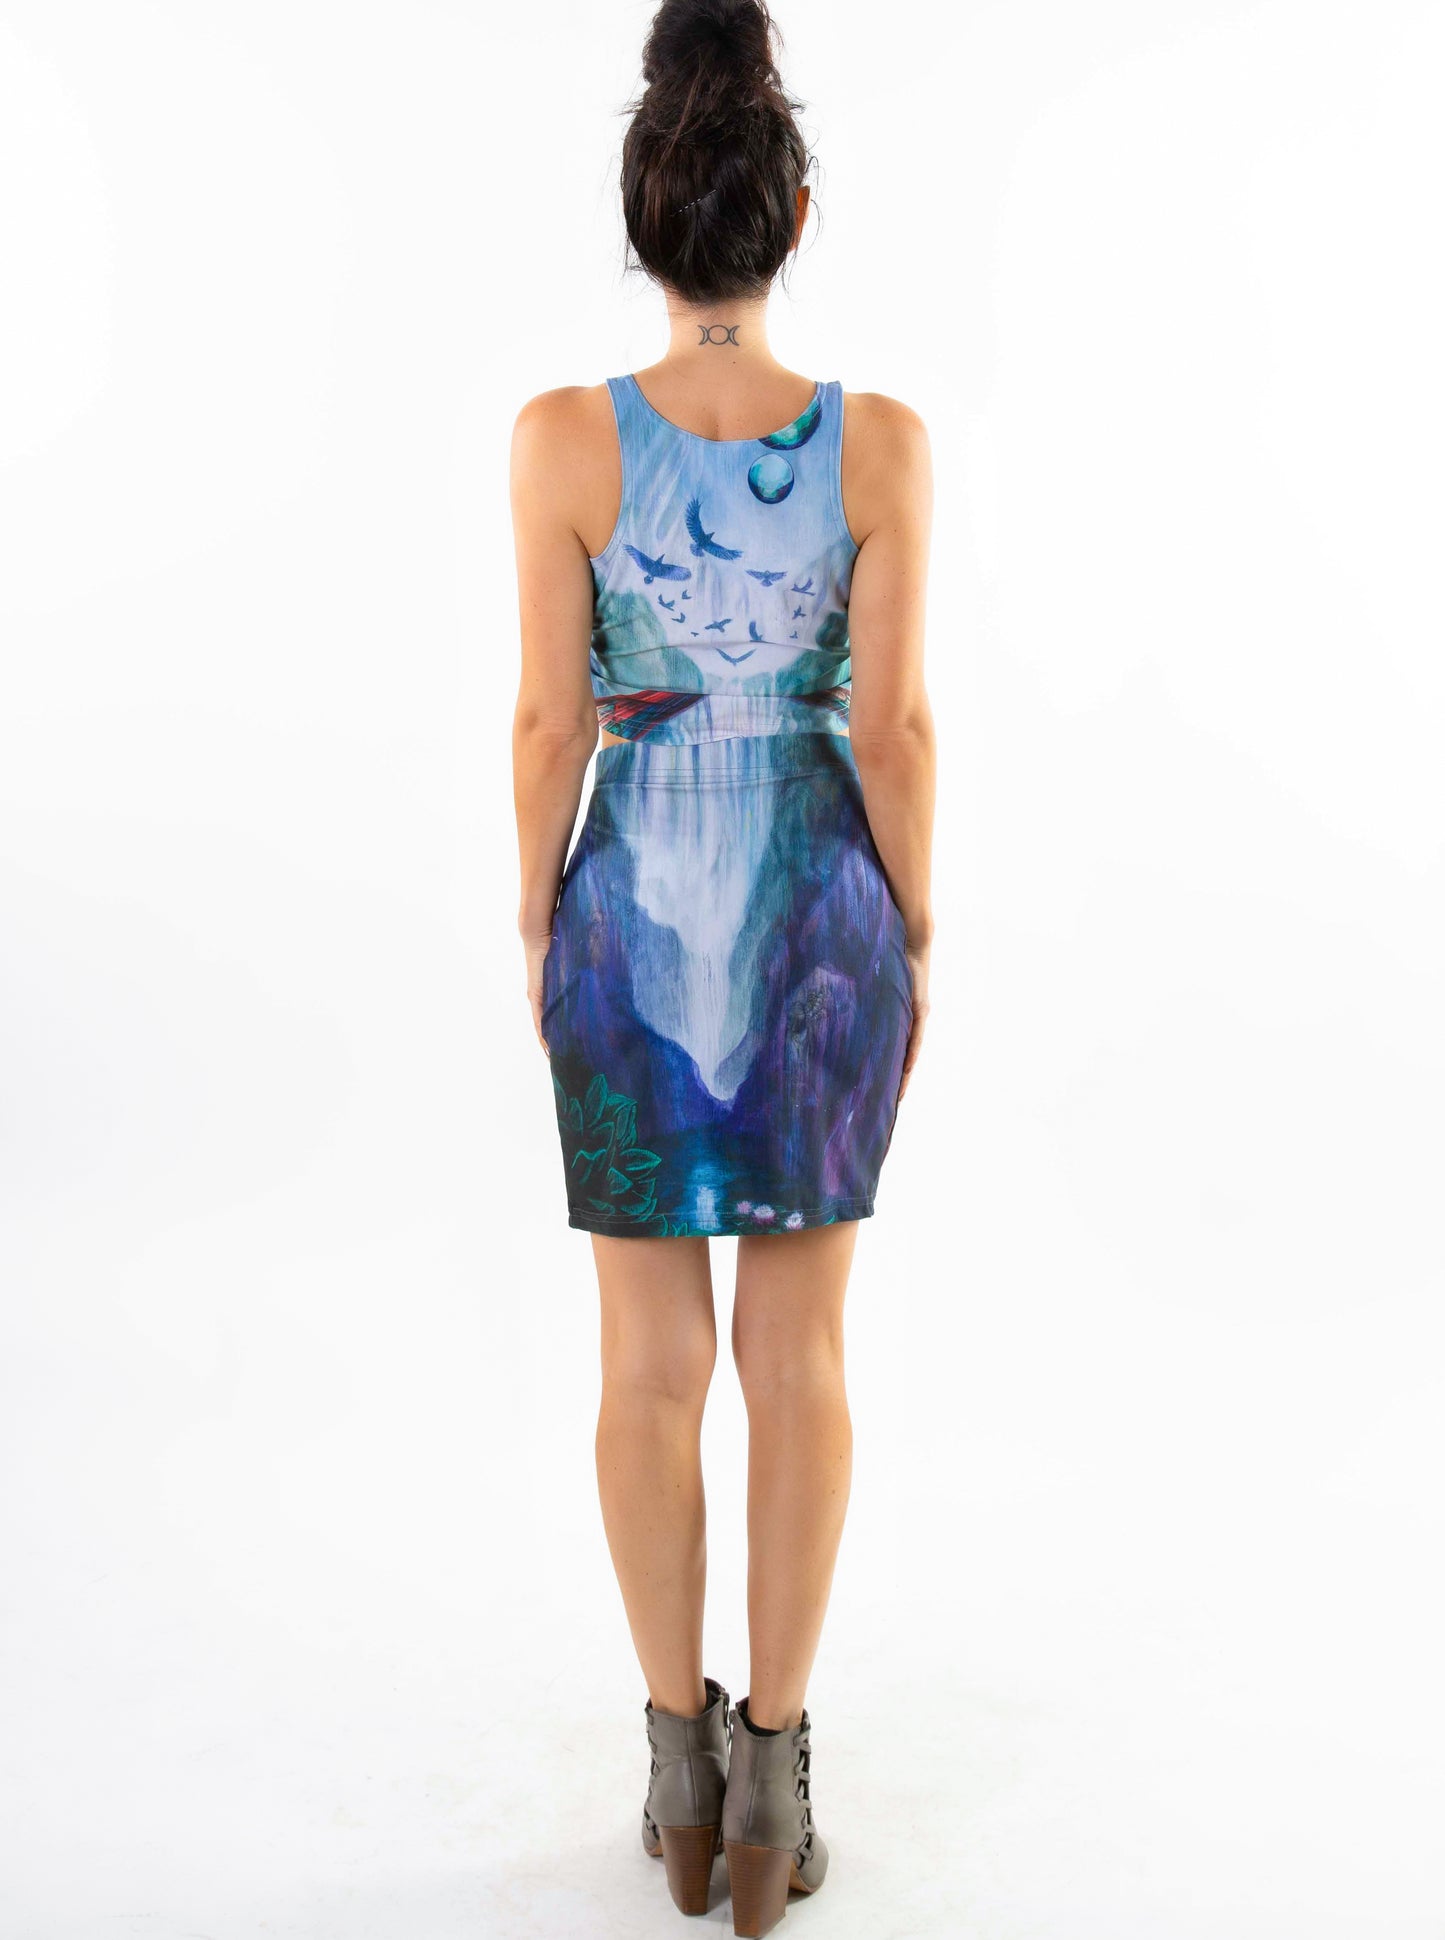 SOJOURN PERFORMANCE TANK TOP